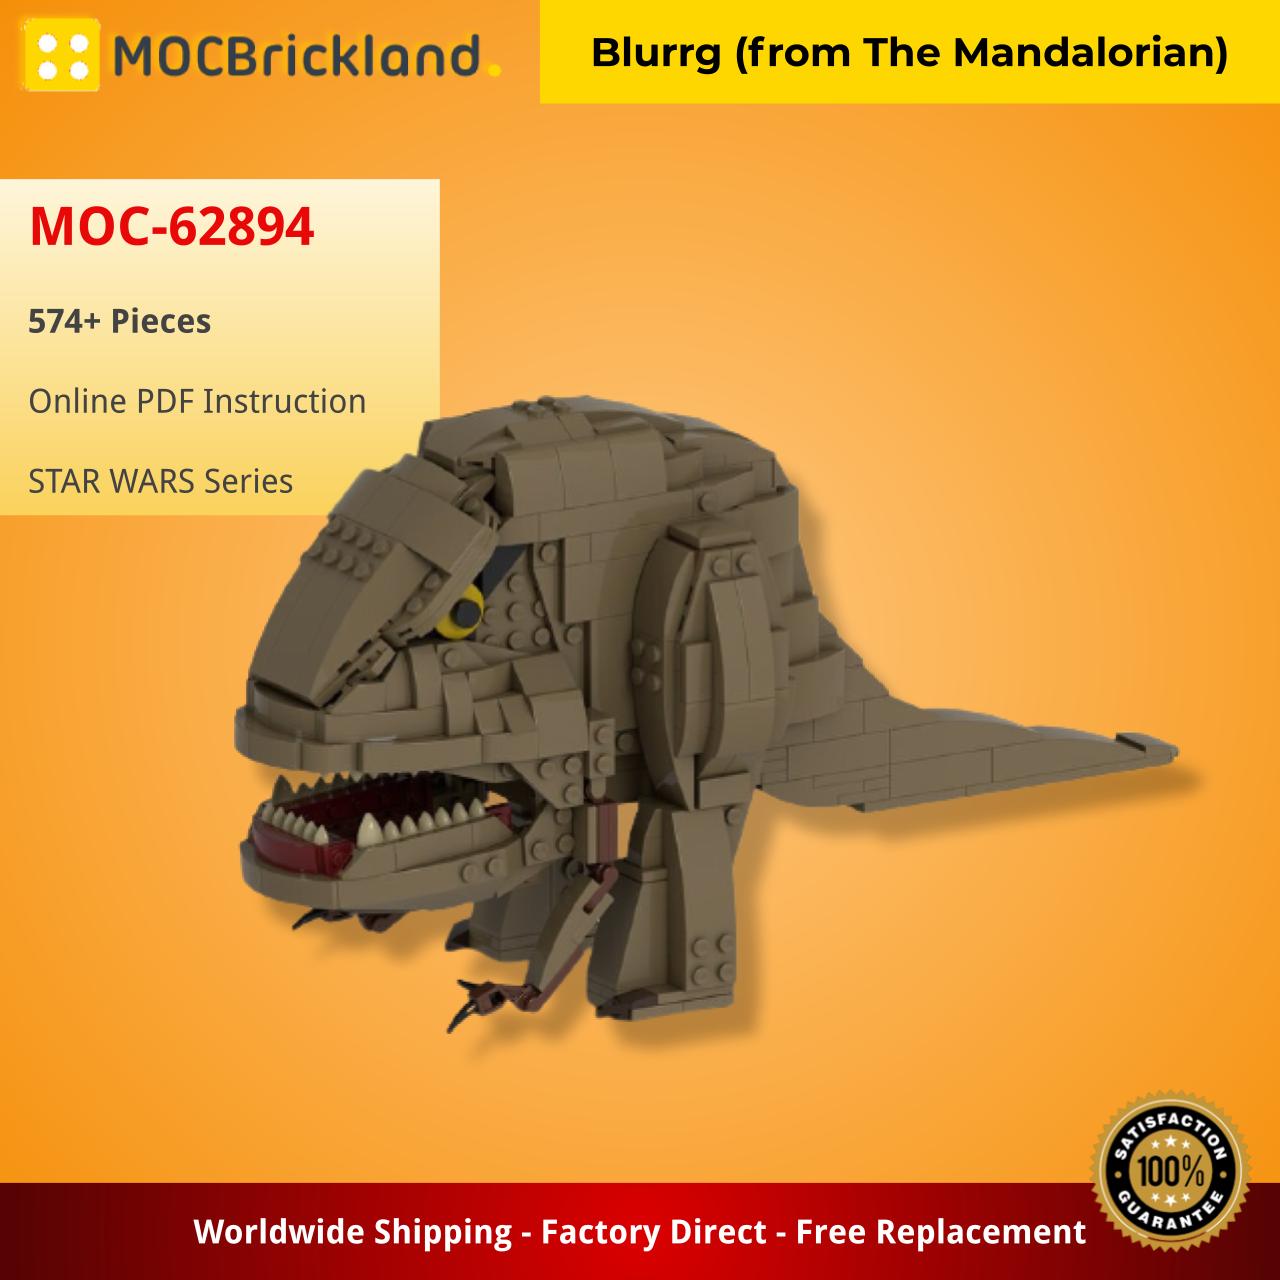 Blurrg (from The Mandalorian) STAR WARS MOC-62894 by tomclarke with 574 pieces